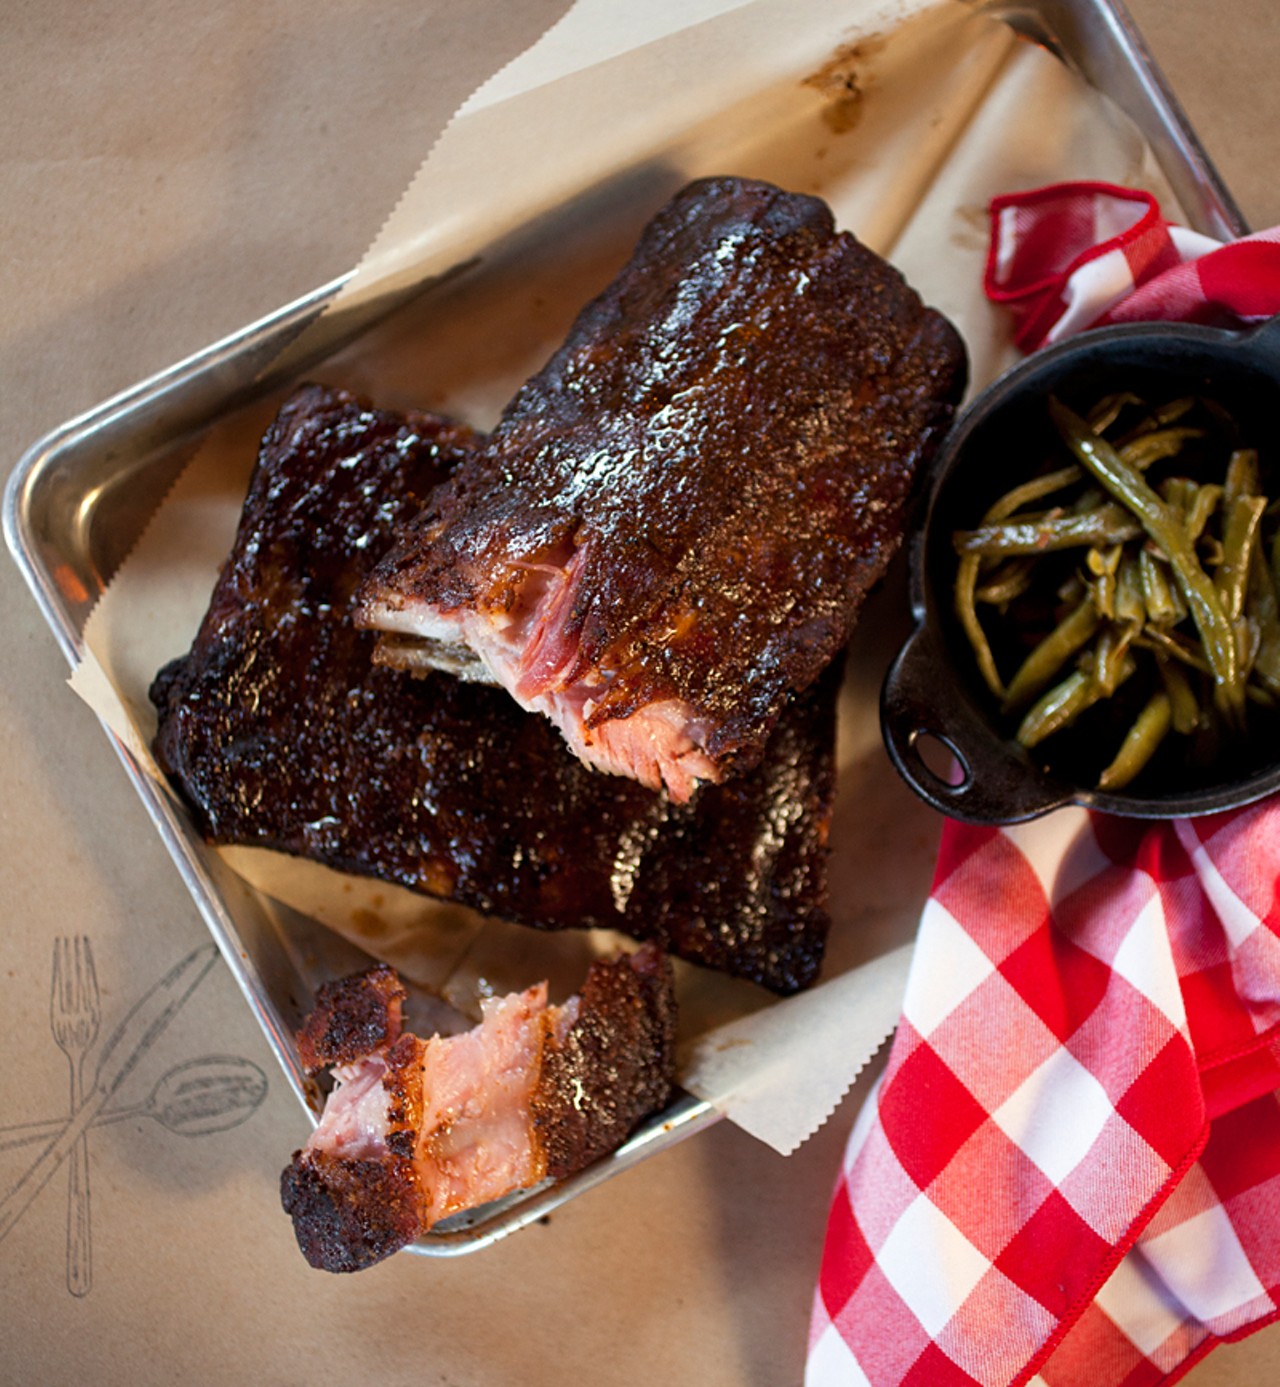 The "Half & Half" is half-rack of St. Louis-style and half-rack baby-back ribs, shown with a side of green beans.